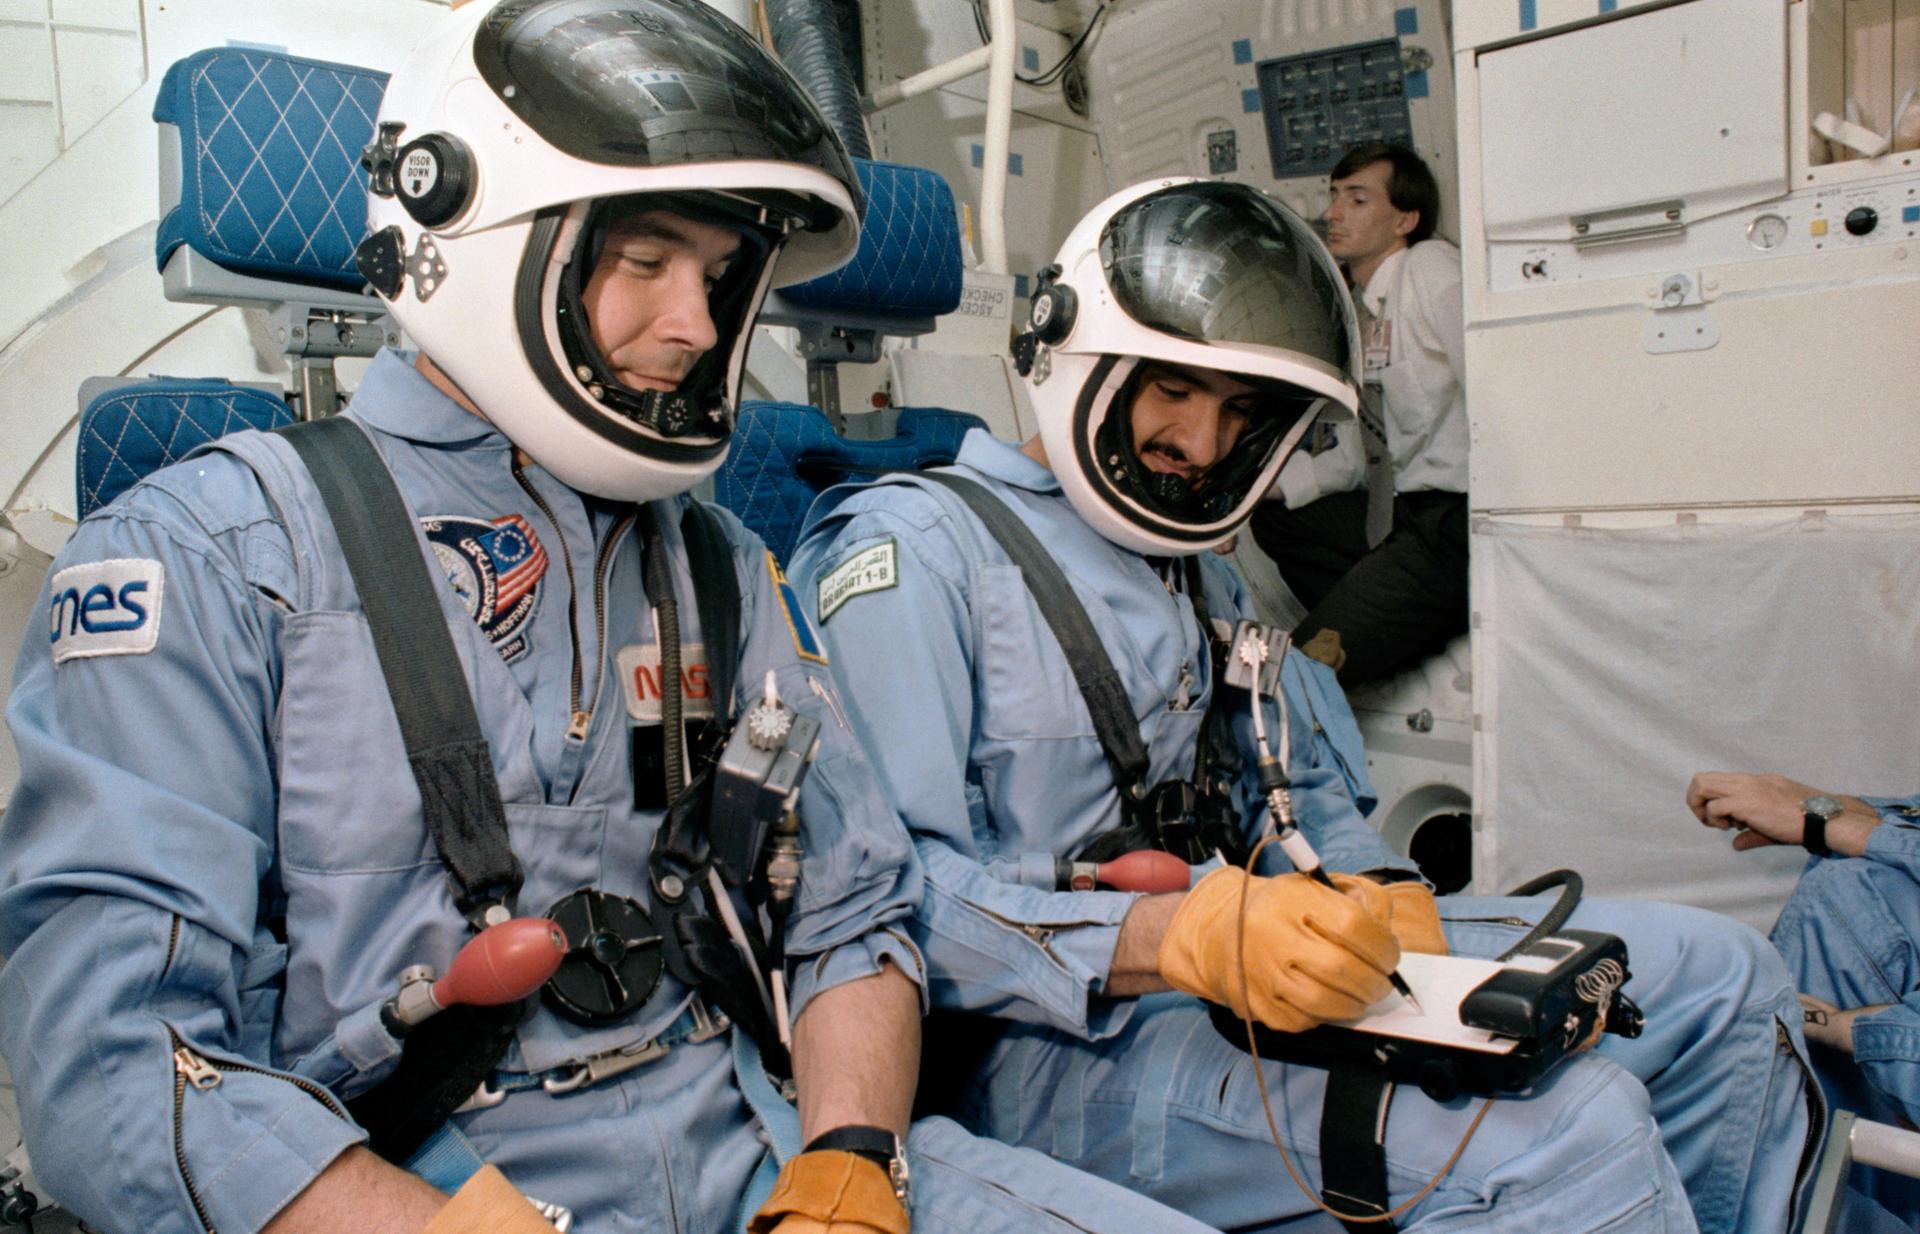 Two astronauts in flight suits and helmets fasten their seat belts on a space shuttle trainer.The one on the right writes on the notepad